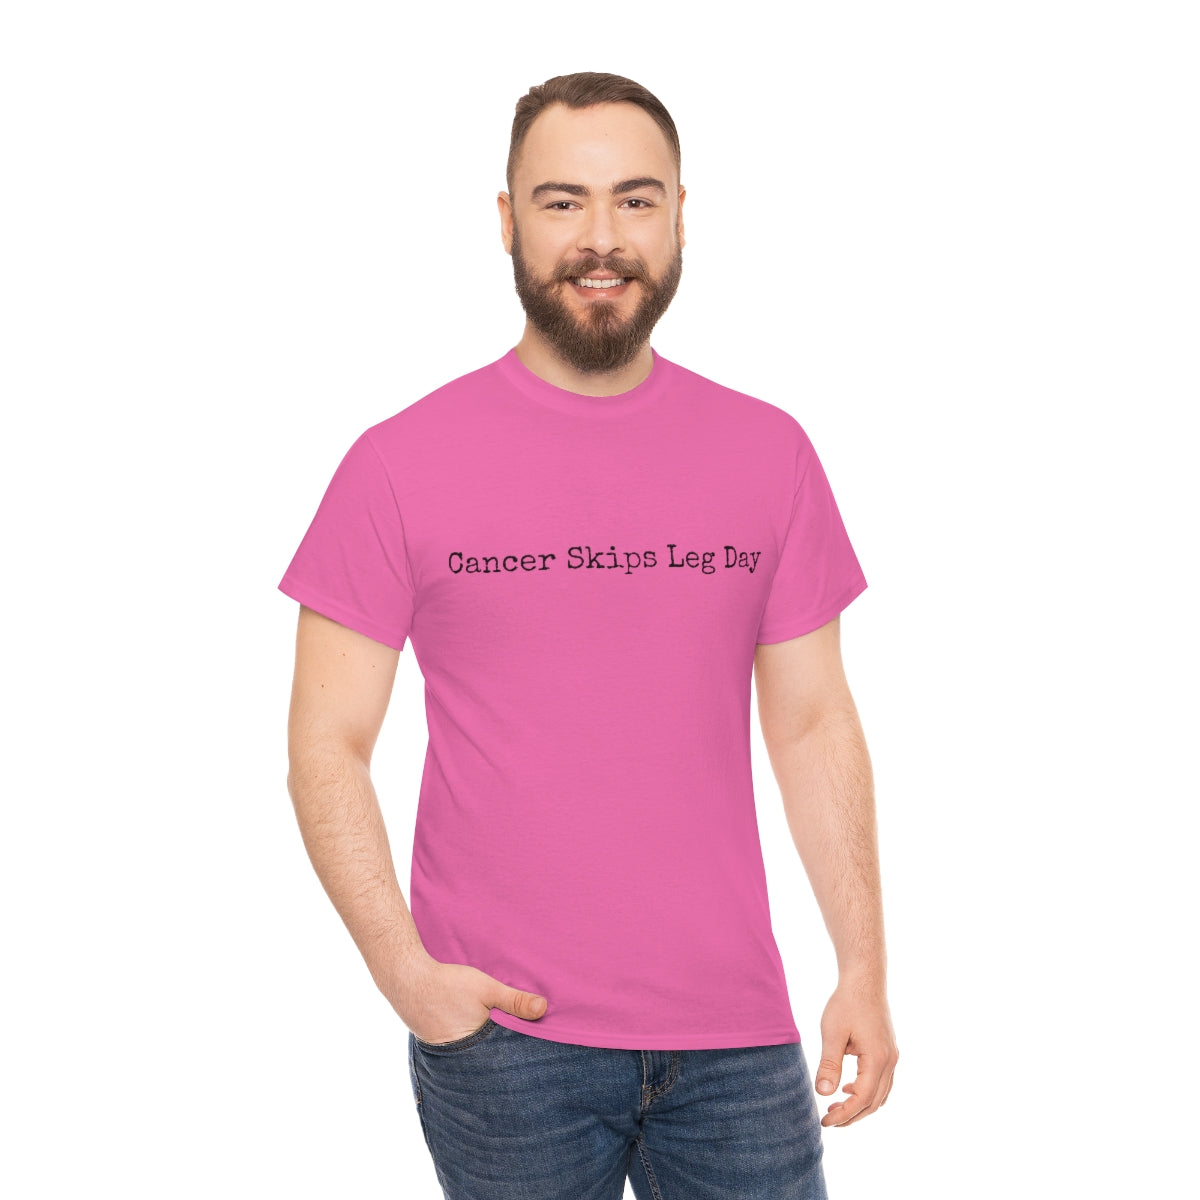 Unisex Heavy Cotton Tee Mens Womens Apparel Clothing Anti Cancer Cancer is Dumb Survivor Support Humorous Funny